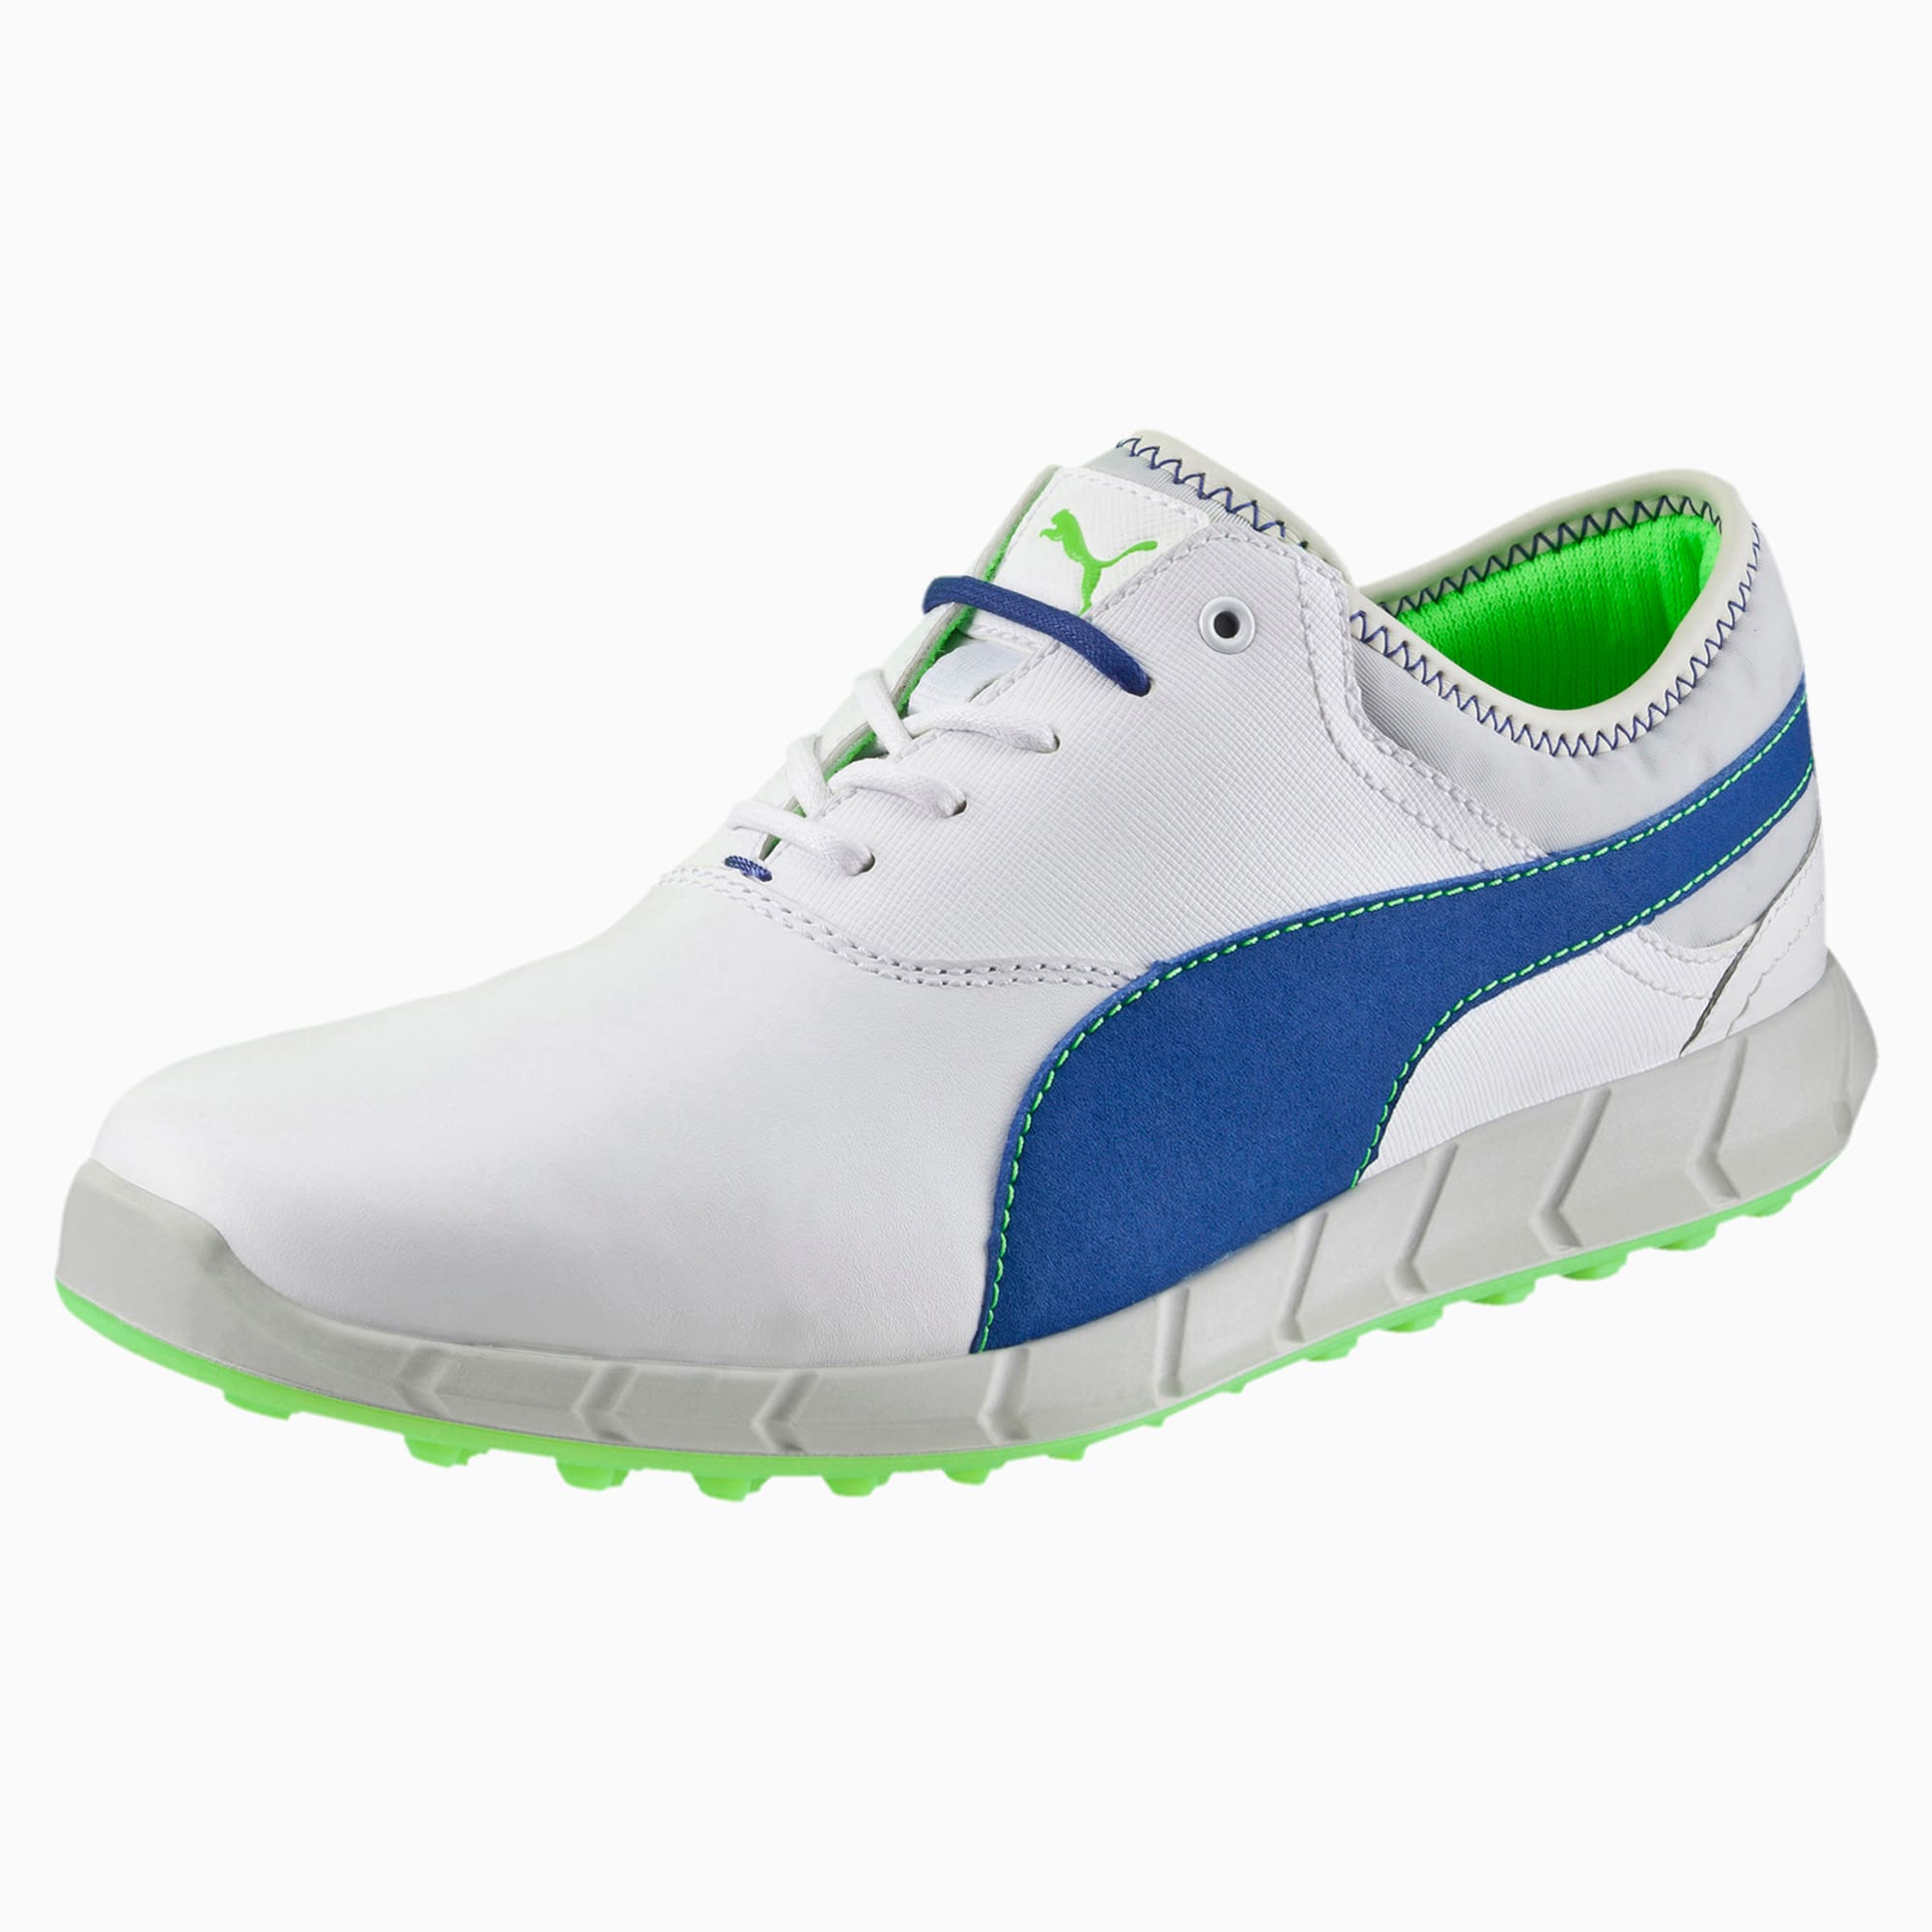 ignite spikeless pro golf shoes